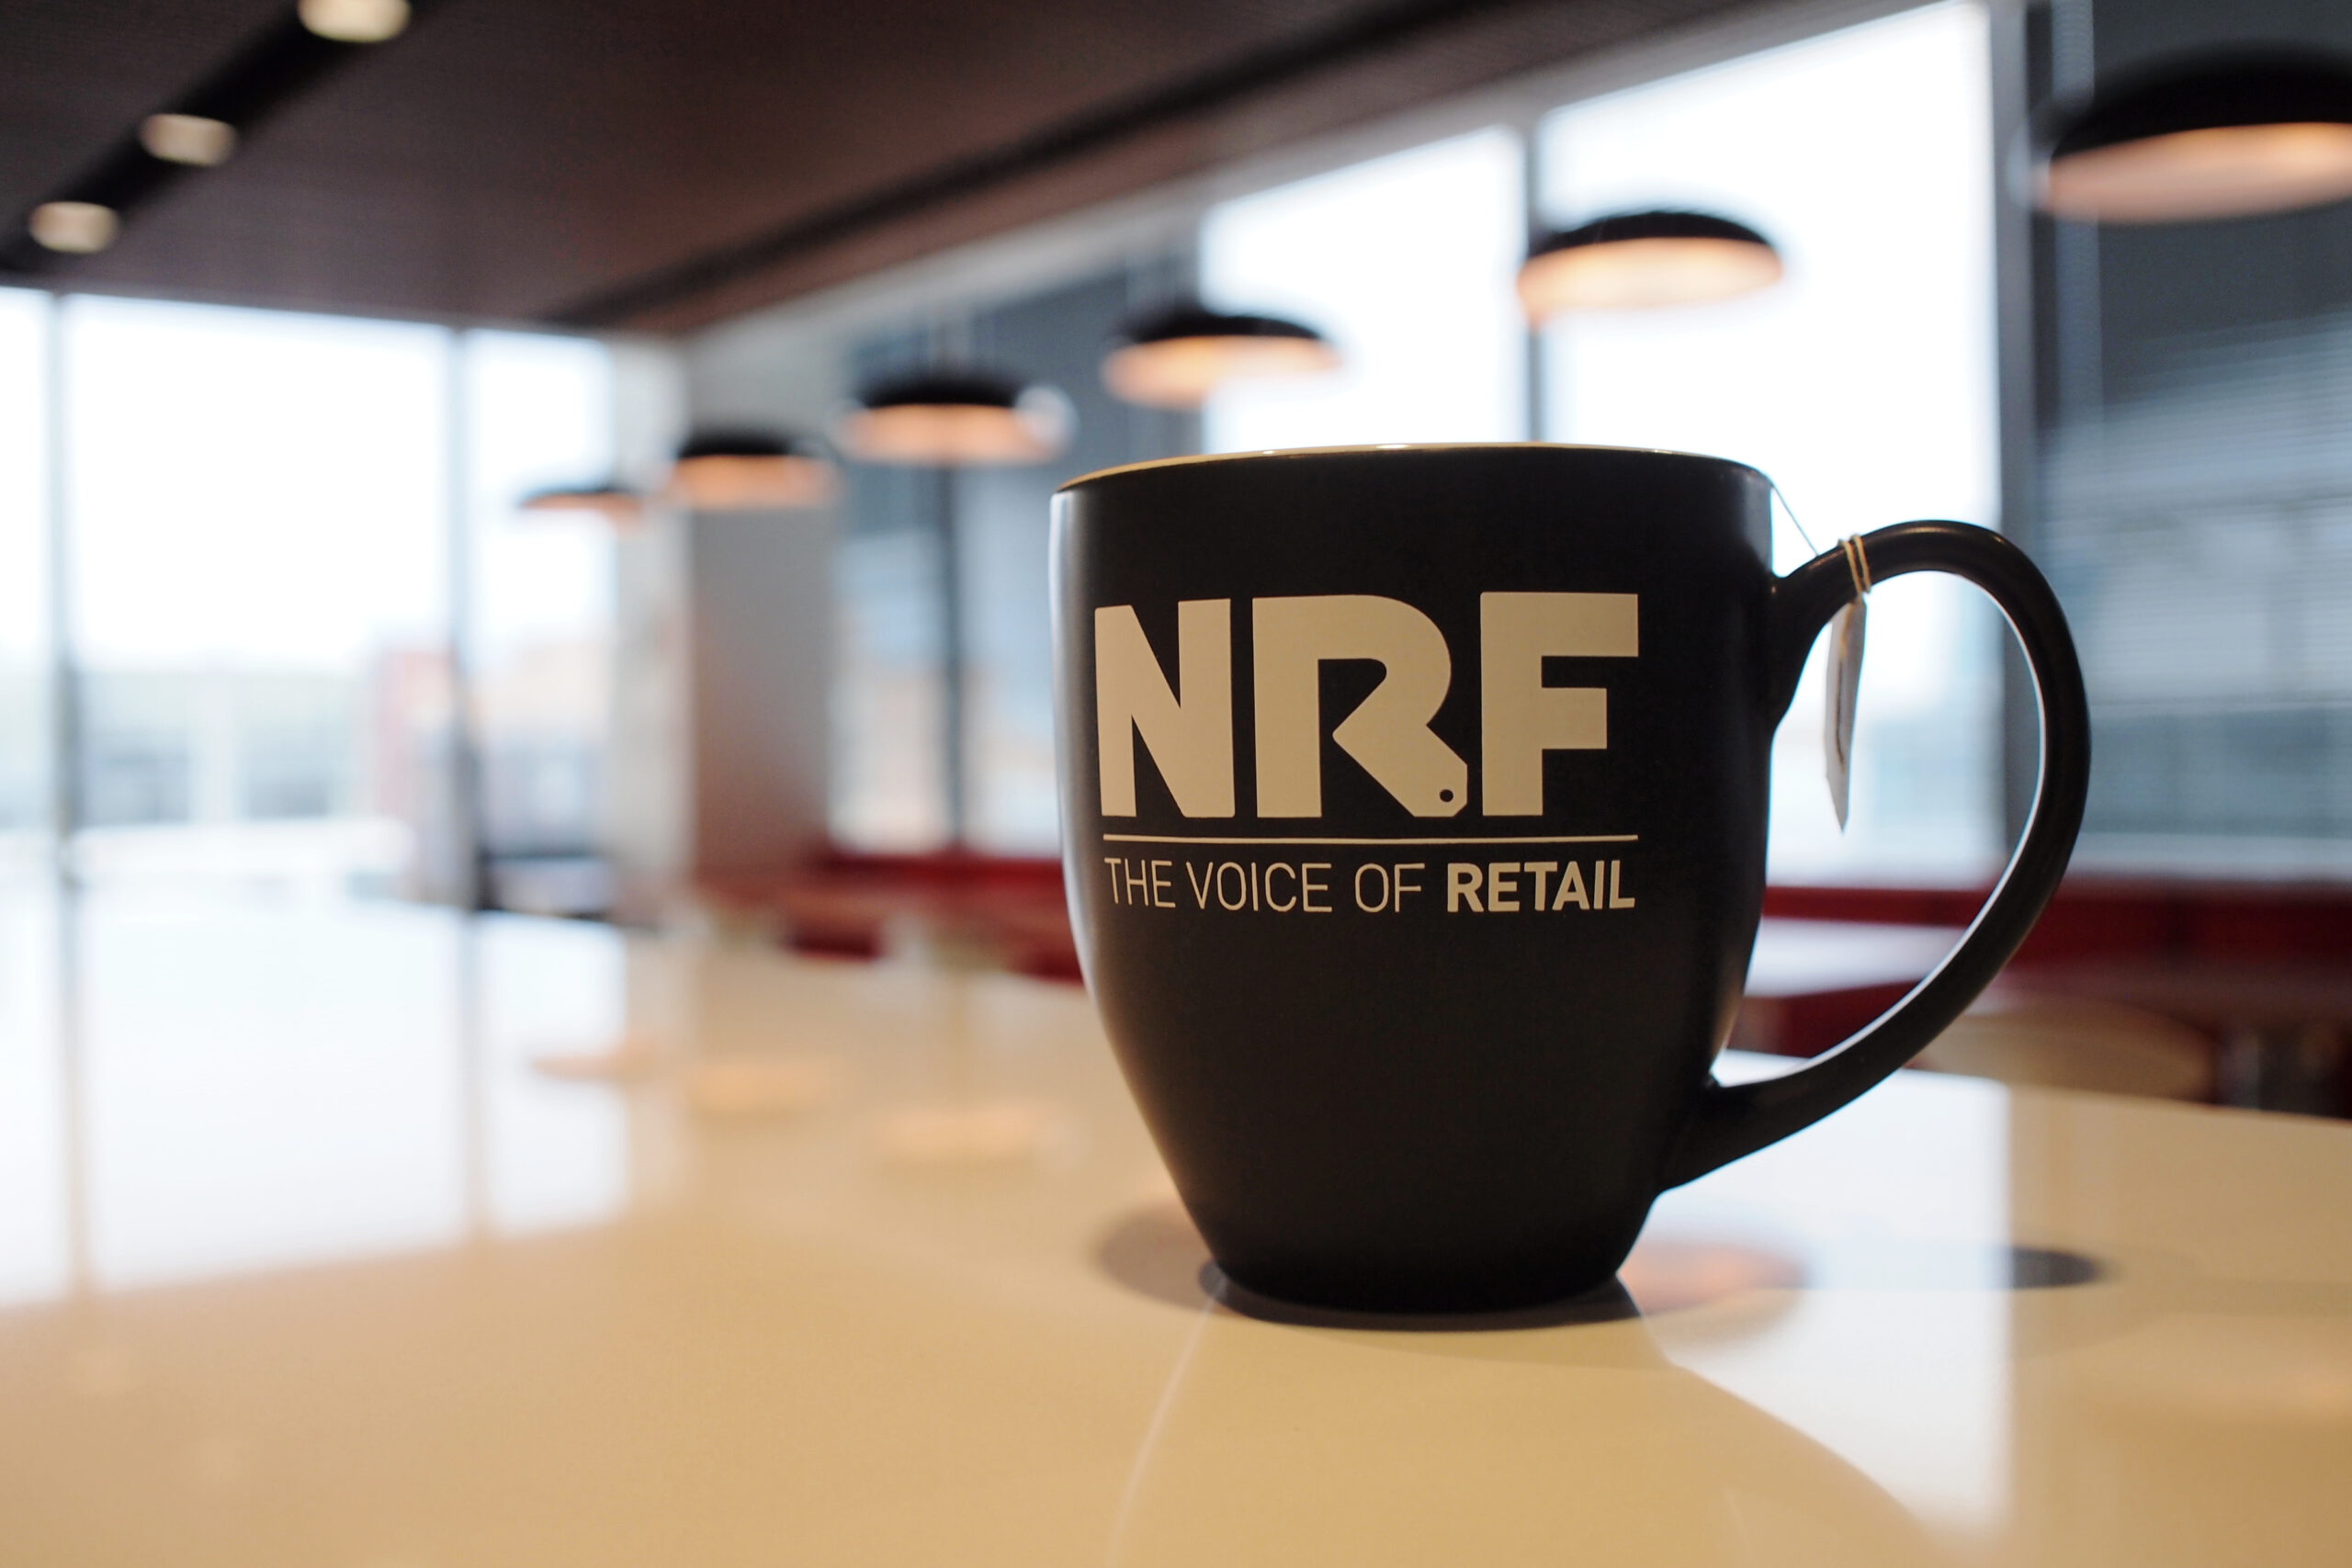 Content creation and digital marketing at NRF